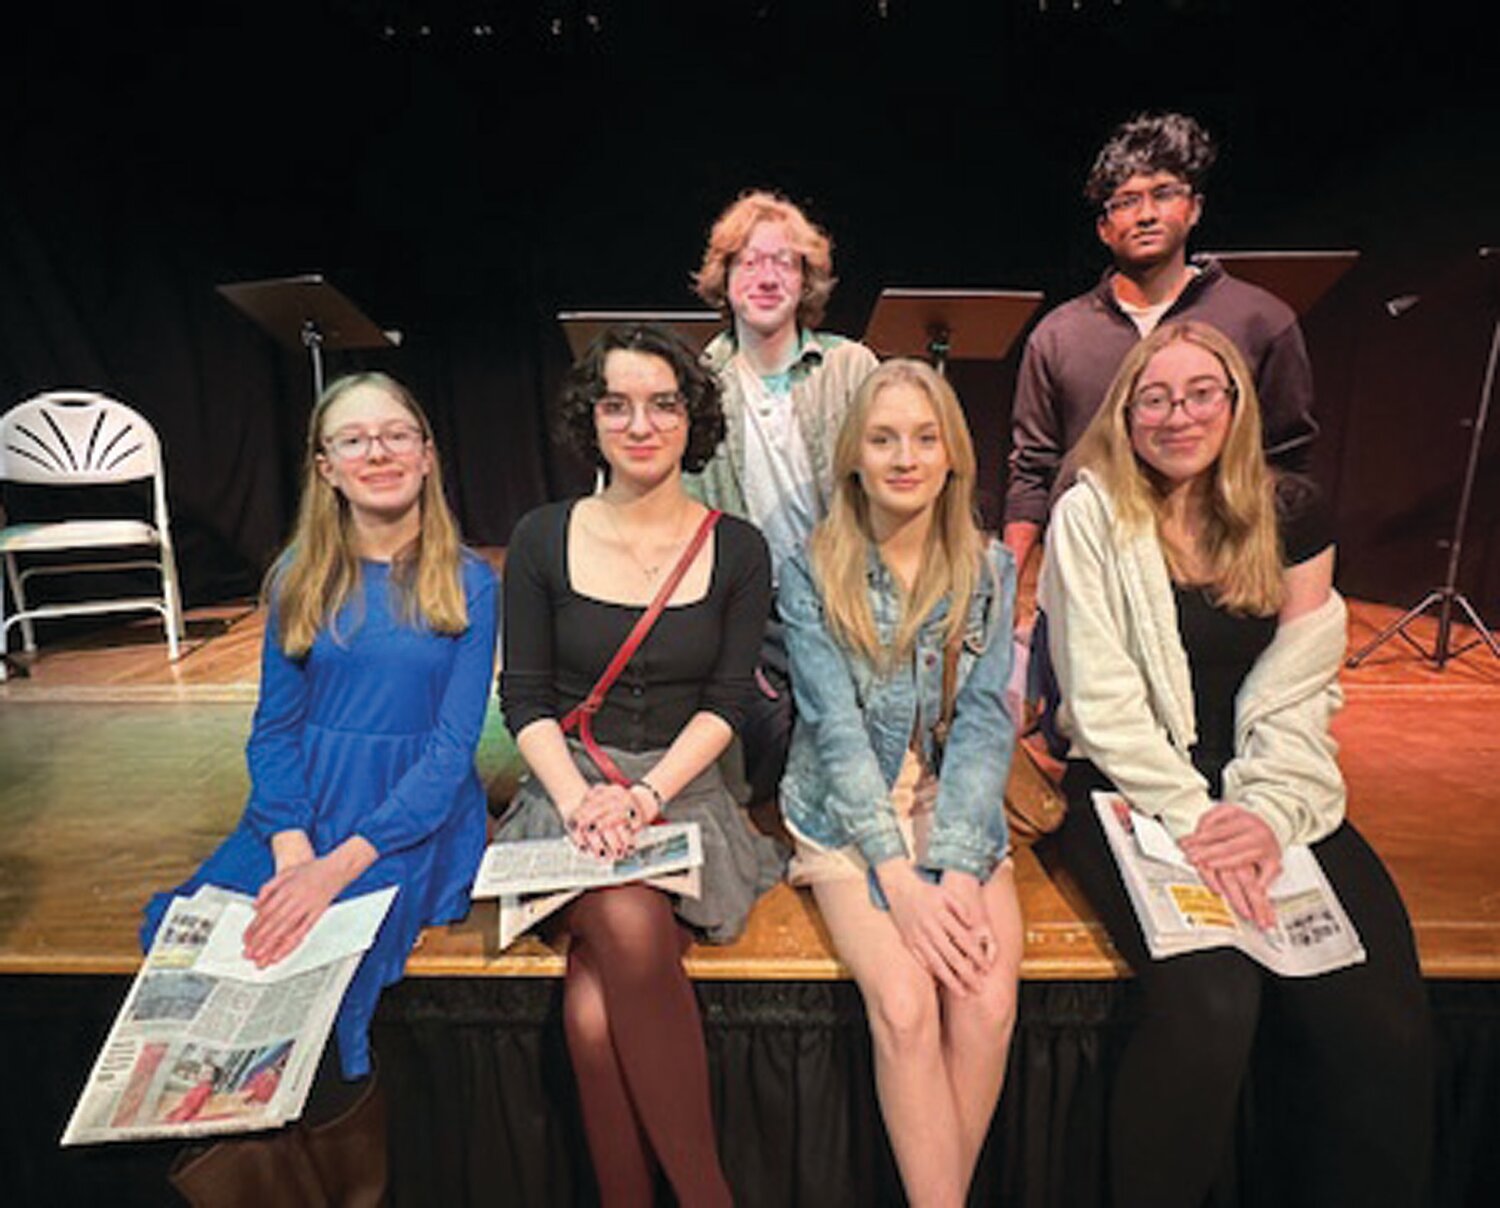 Winners of the “Play With Words” playwriting challenge sit at the edge of the stage at Phillips’ Mill. From left are: Front row, Corinne Brintnall, Saskia Cooper, Matilda Bray, Avigain Vus: Back row, Finn Anderson, Srikar Pothuraju.